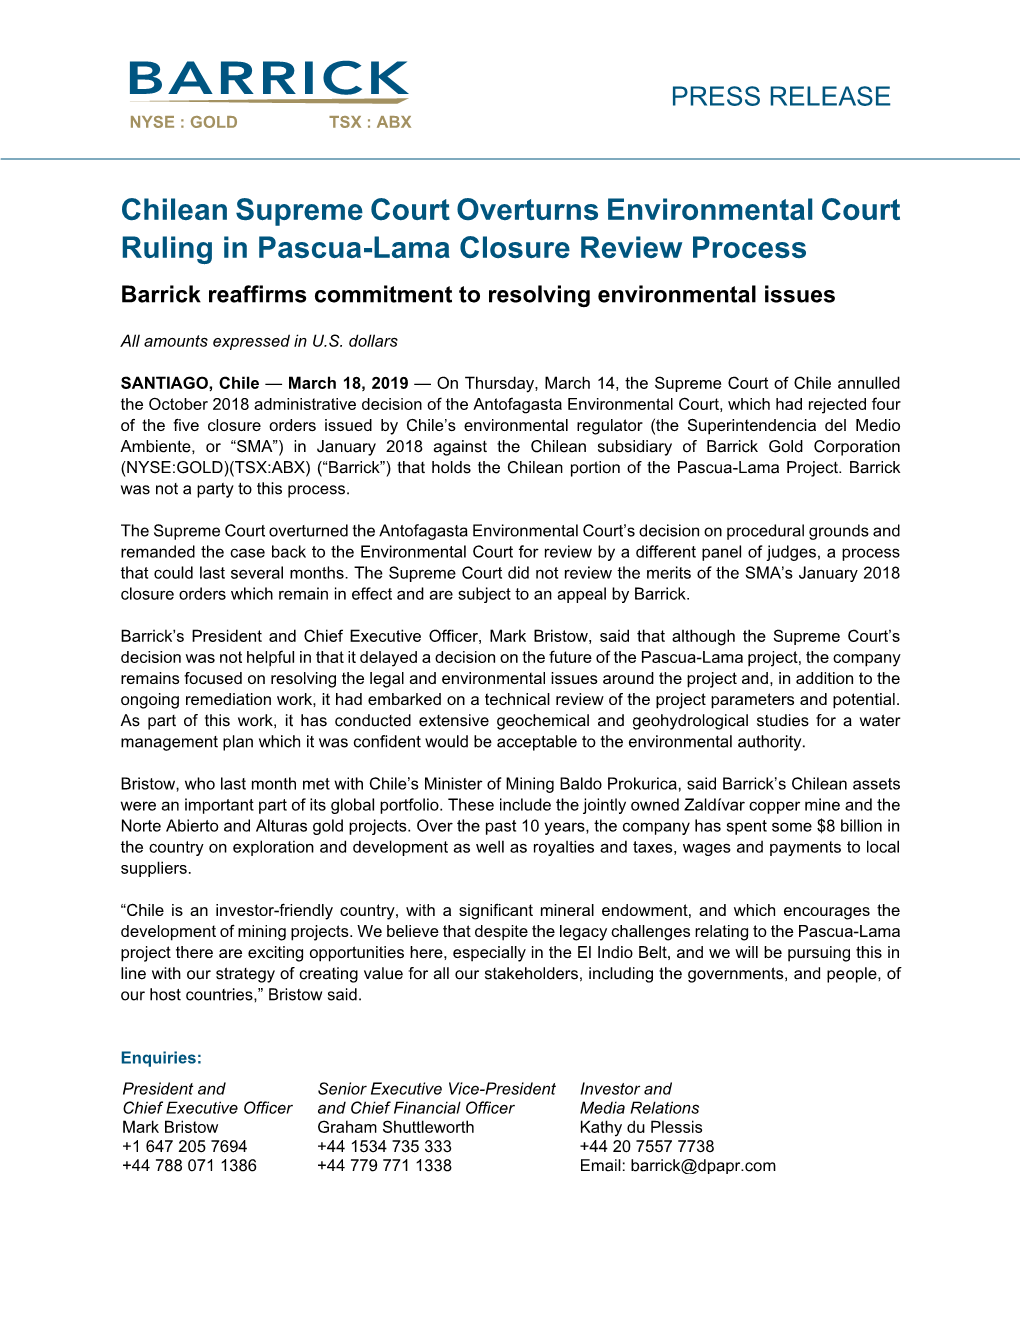 Chilean Supreme Court Overturns Environmental Court Ruling in Pascua-Lama Closure Review Process